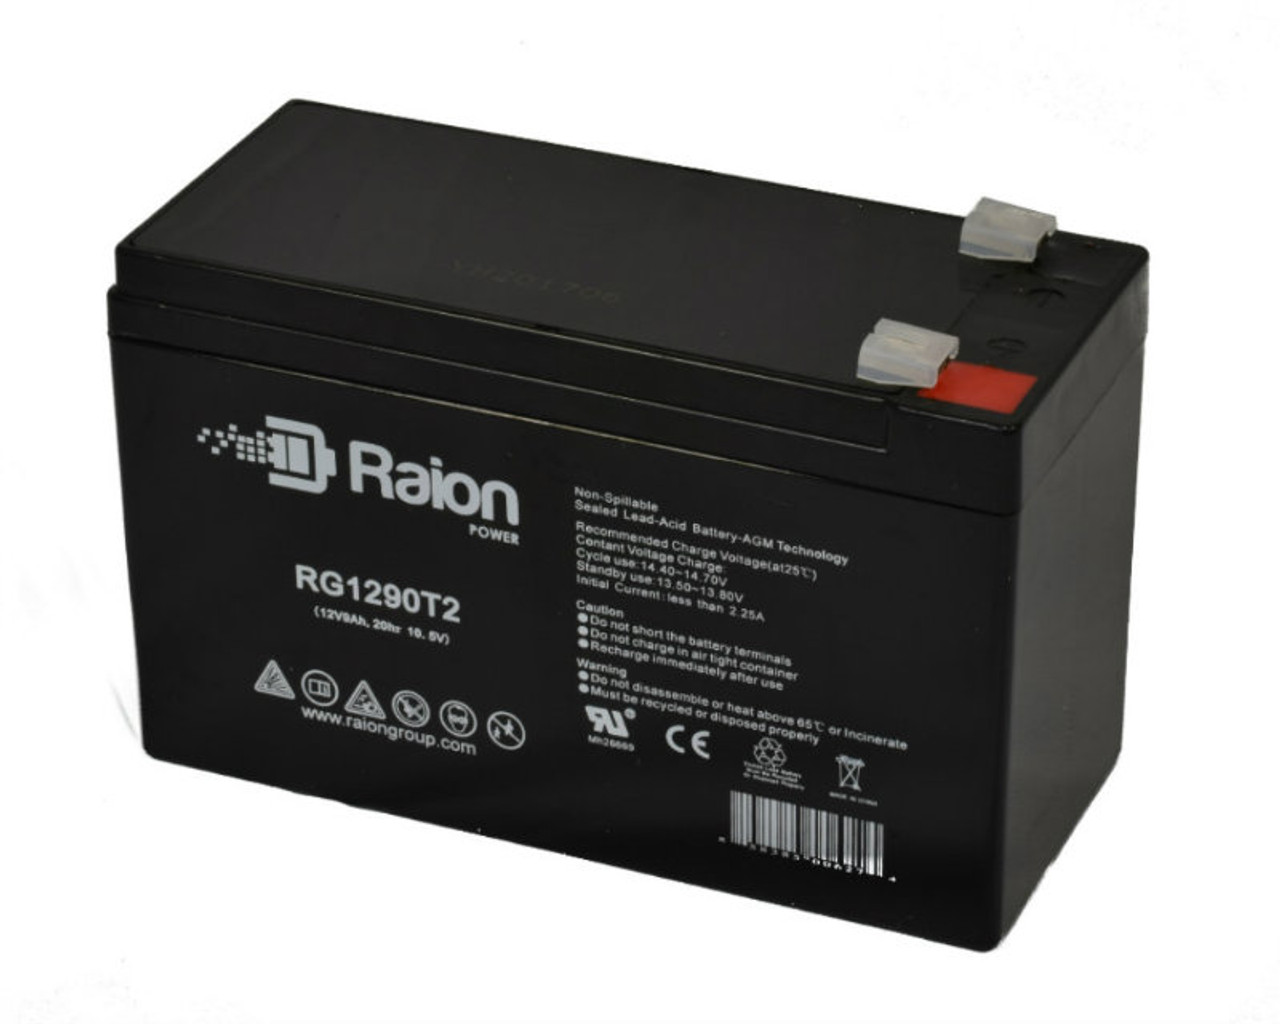 Raion Power RG1290T2 12V 9Ah AGM Battery for Consent Battery GS128-5